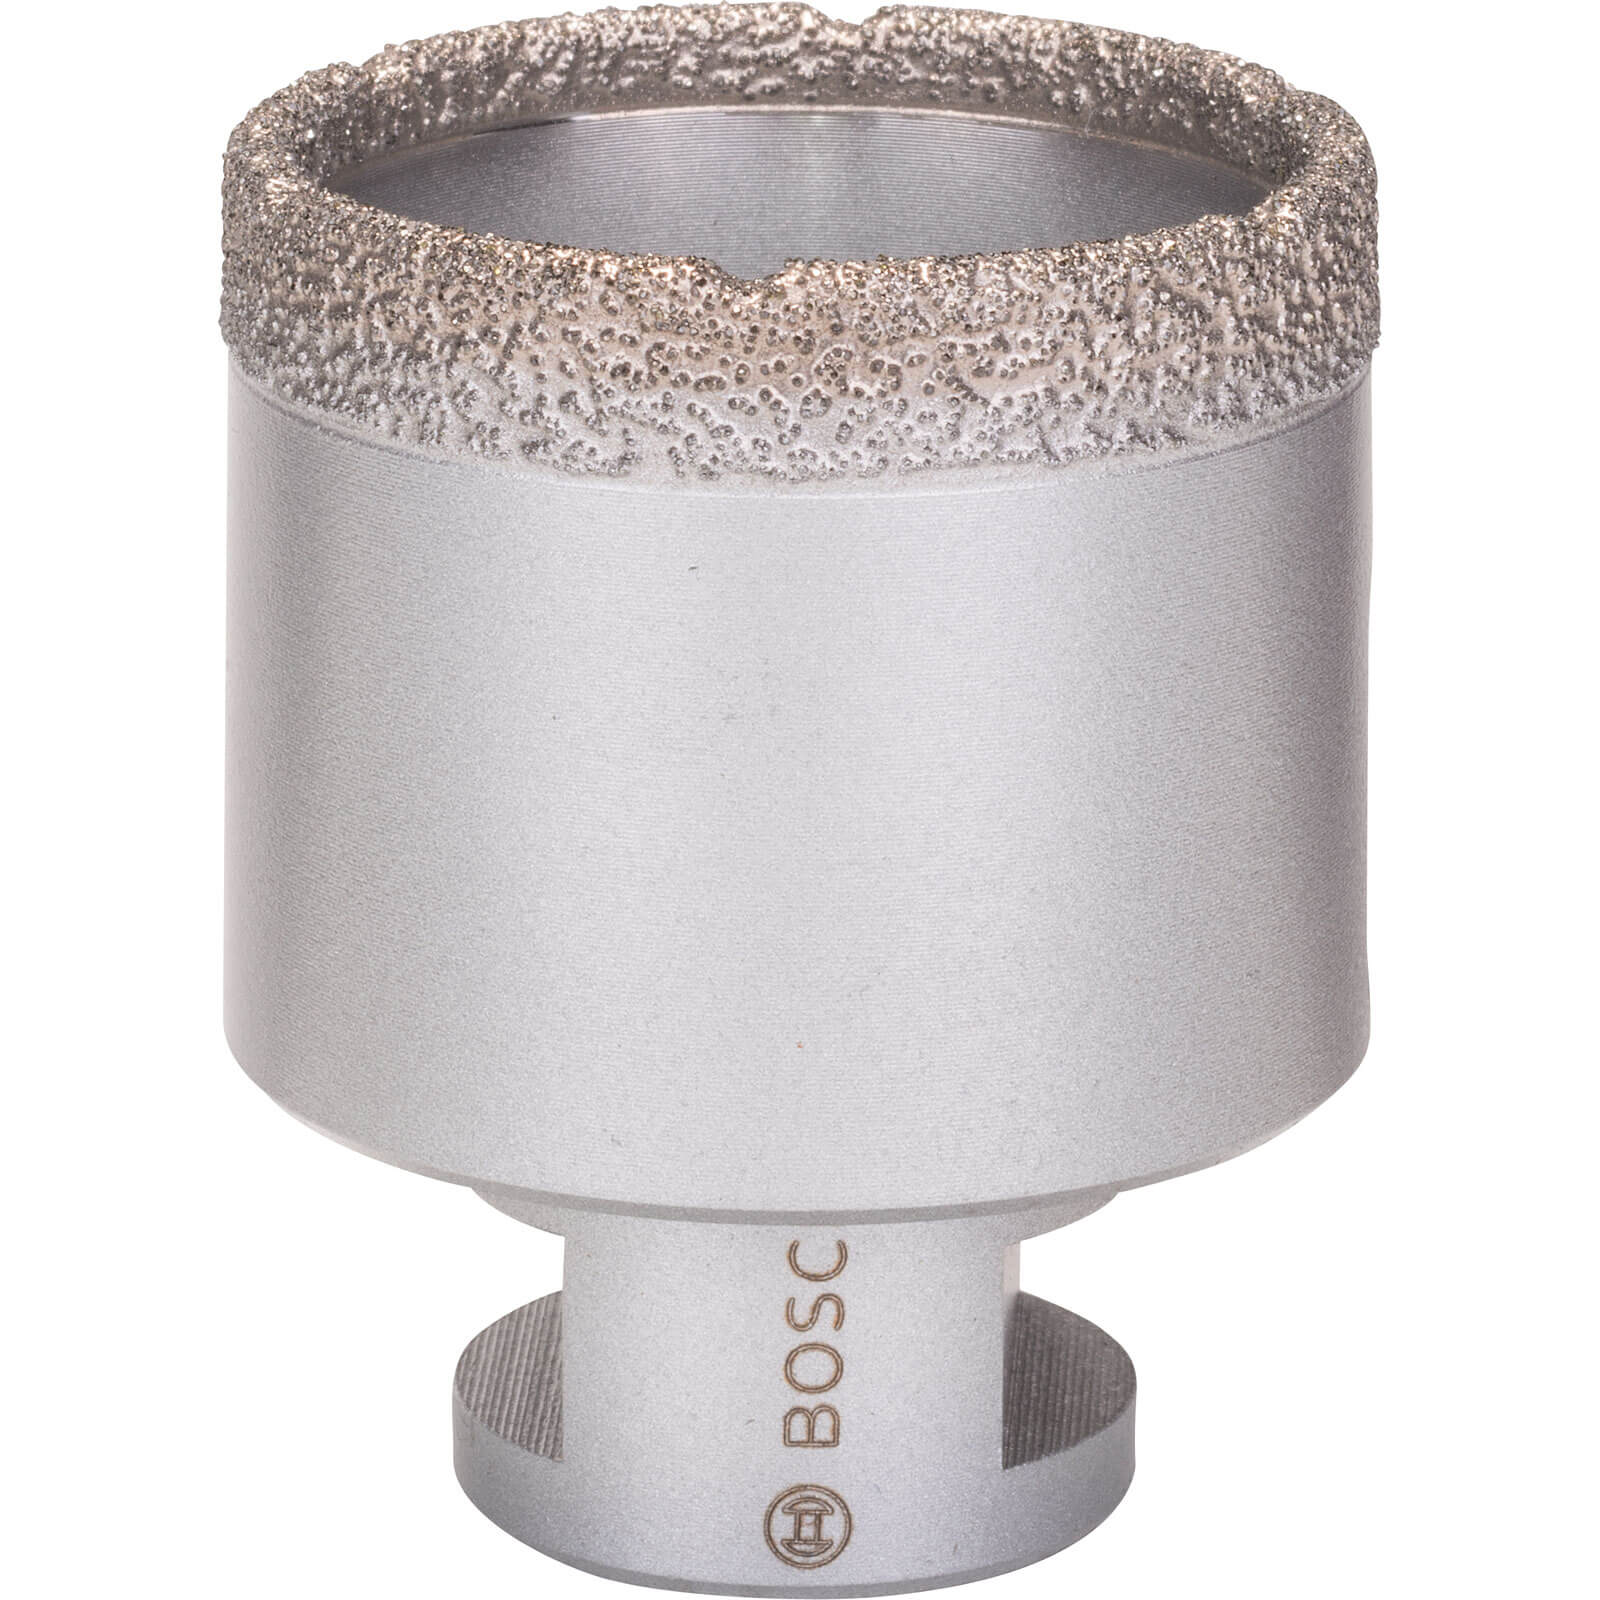 Photo of Bosch Angle Grinder Dry Diamond Hole Cutter For Ceramics 51mm